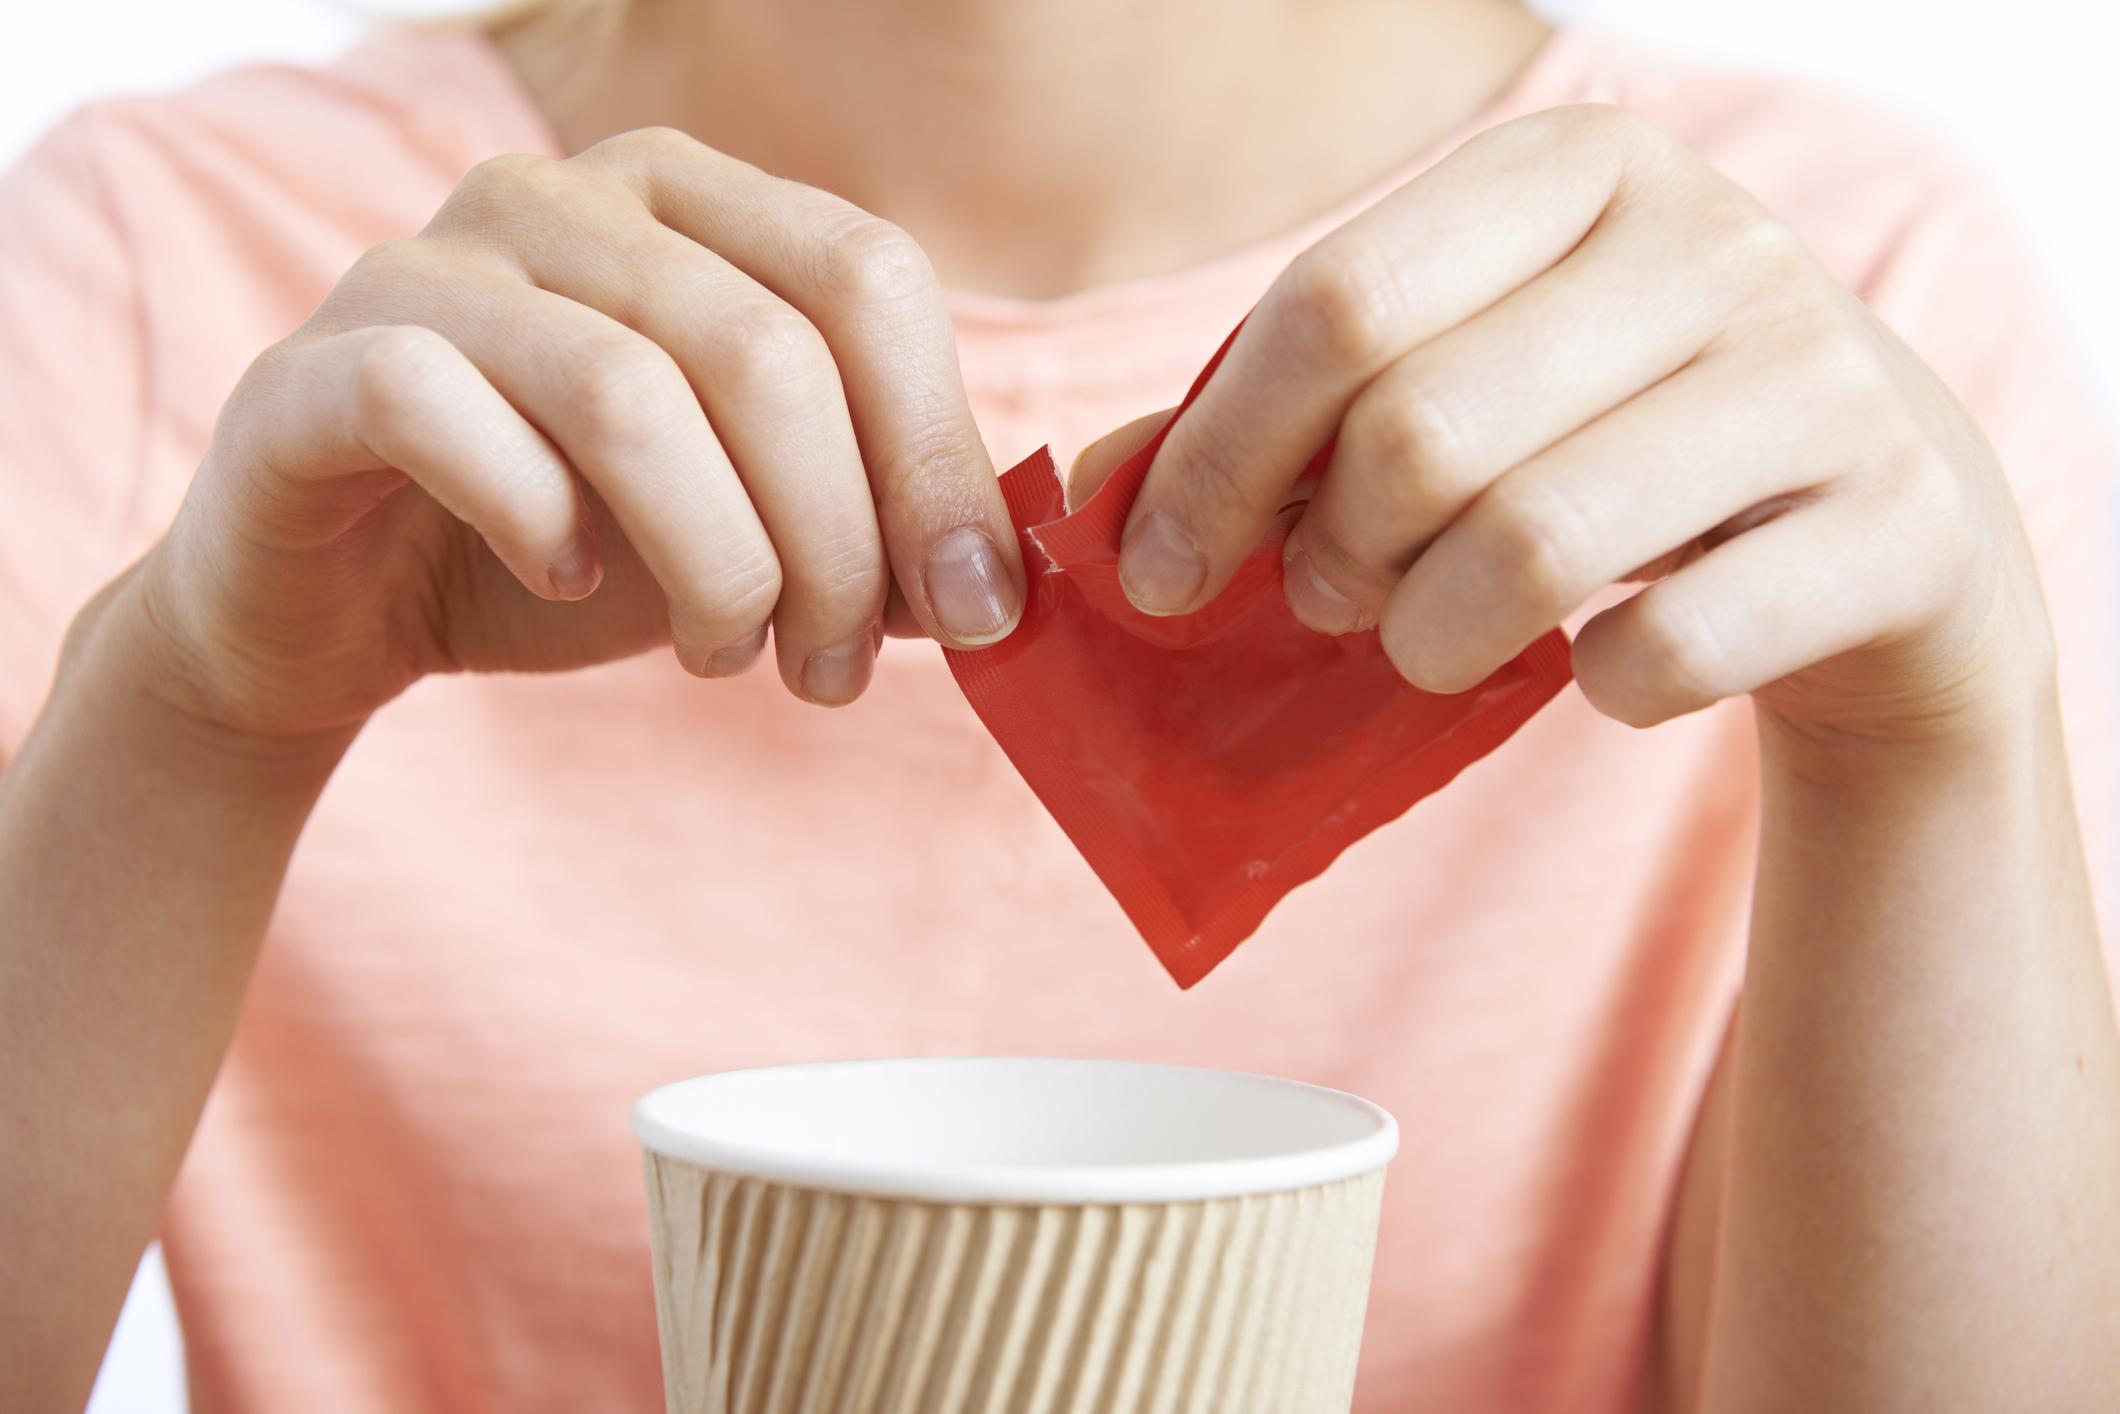 person tearing open red package over a paper cup